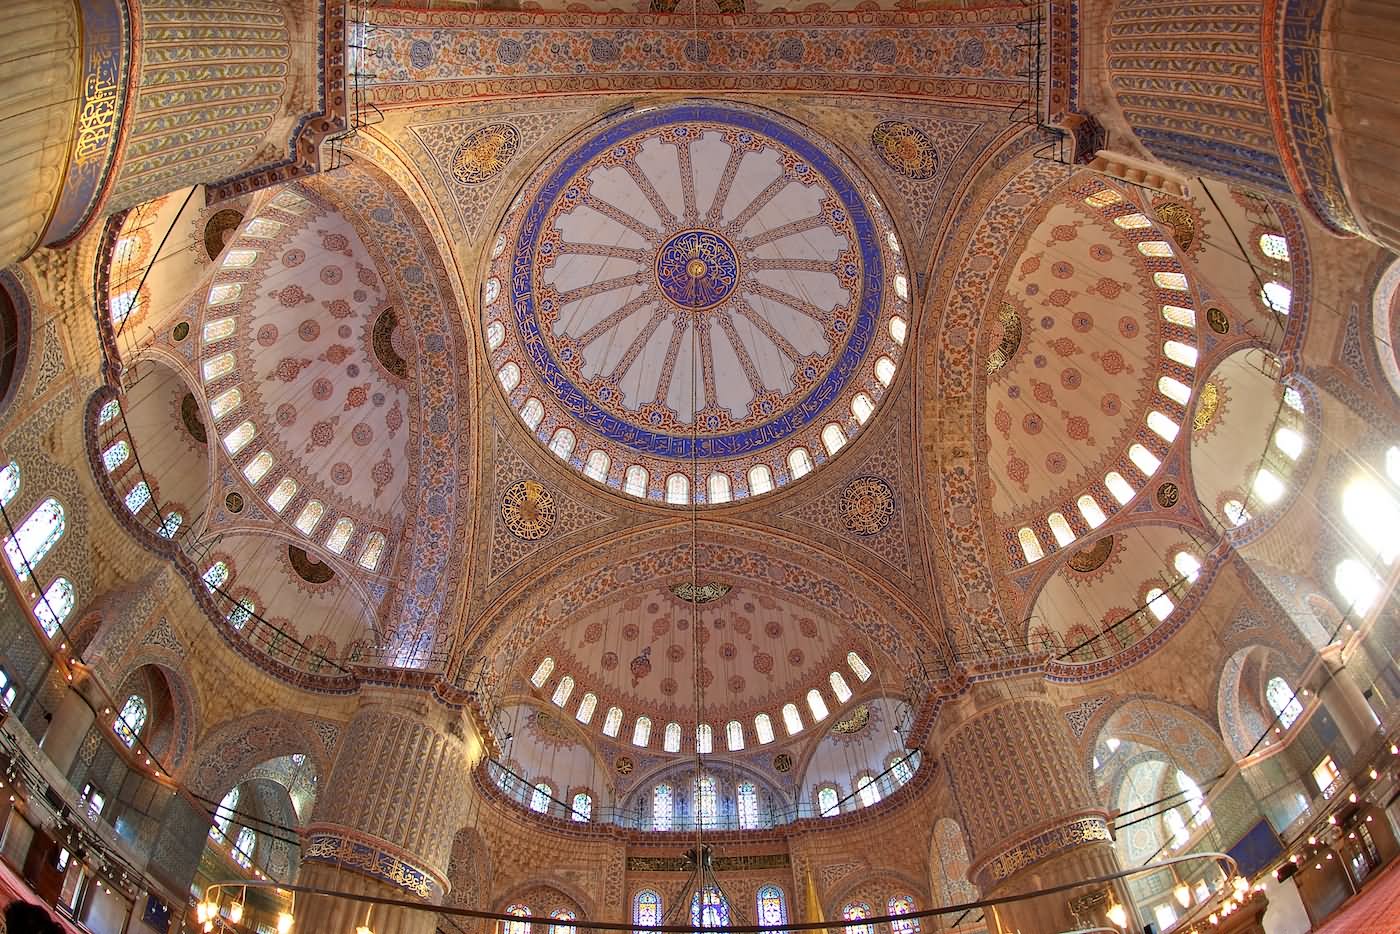 30 Most Incredible Interior View Images Of The Blue Mosque, Istanbul